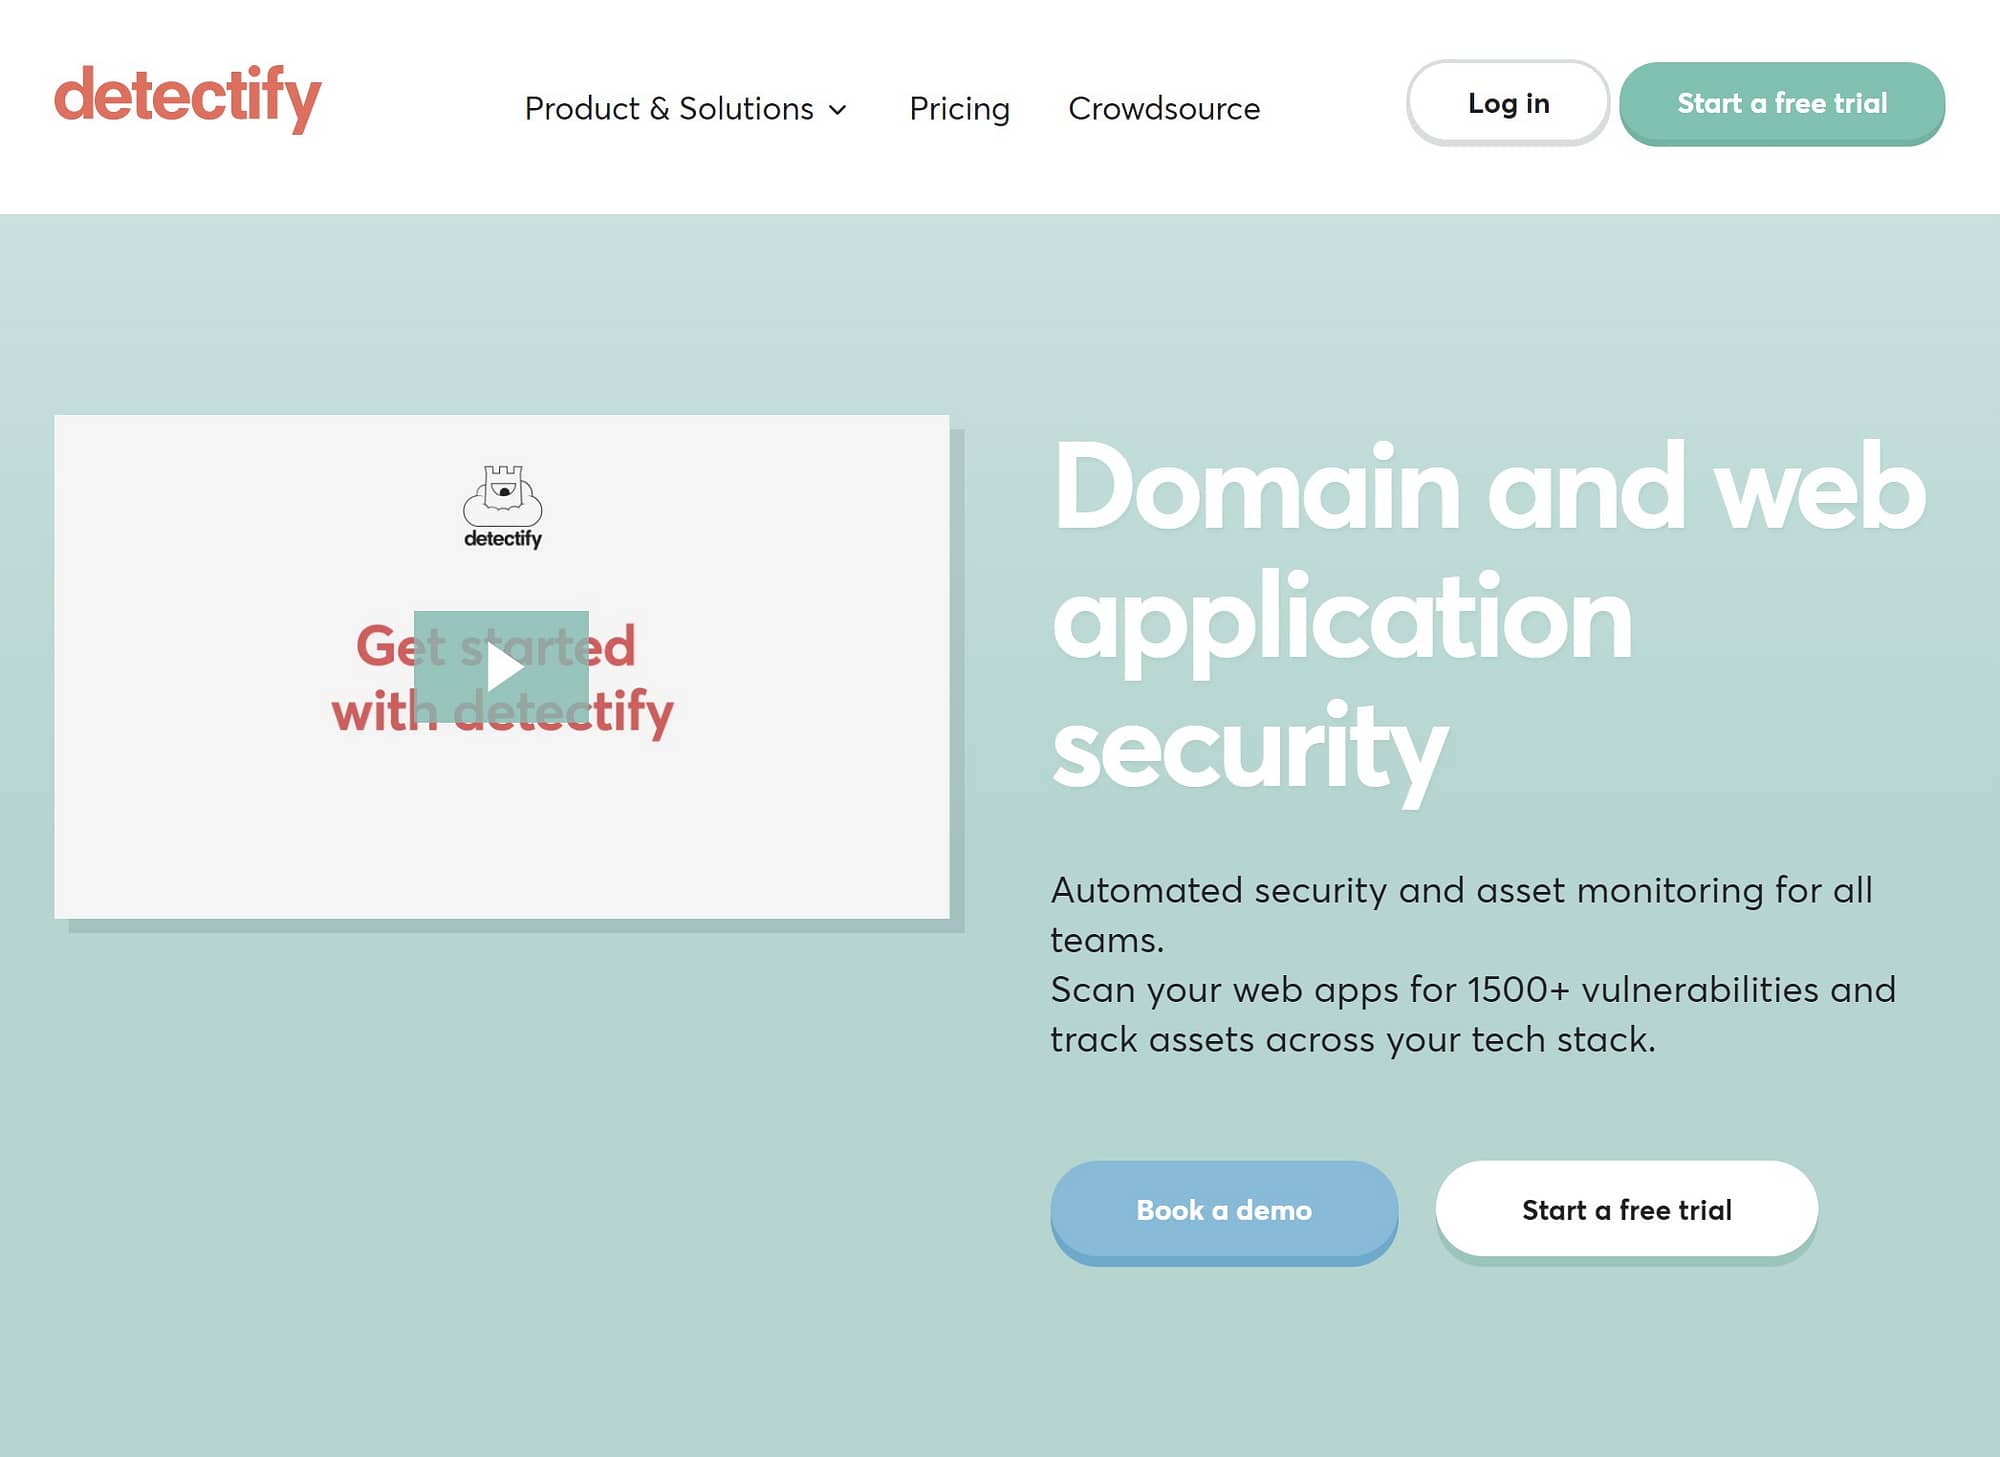 Detectify website security check tool